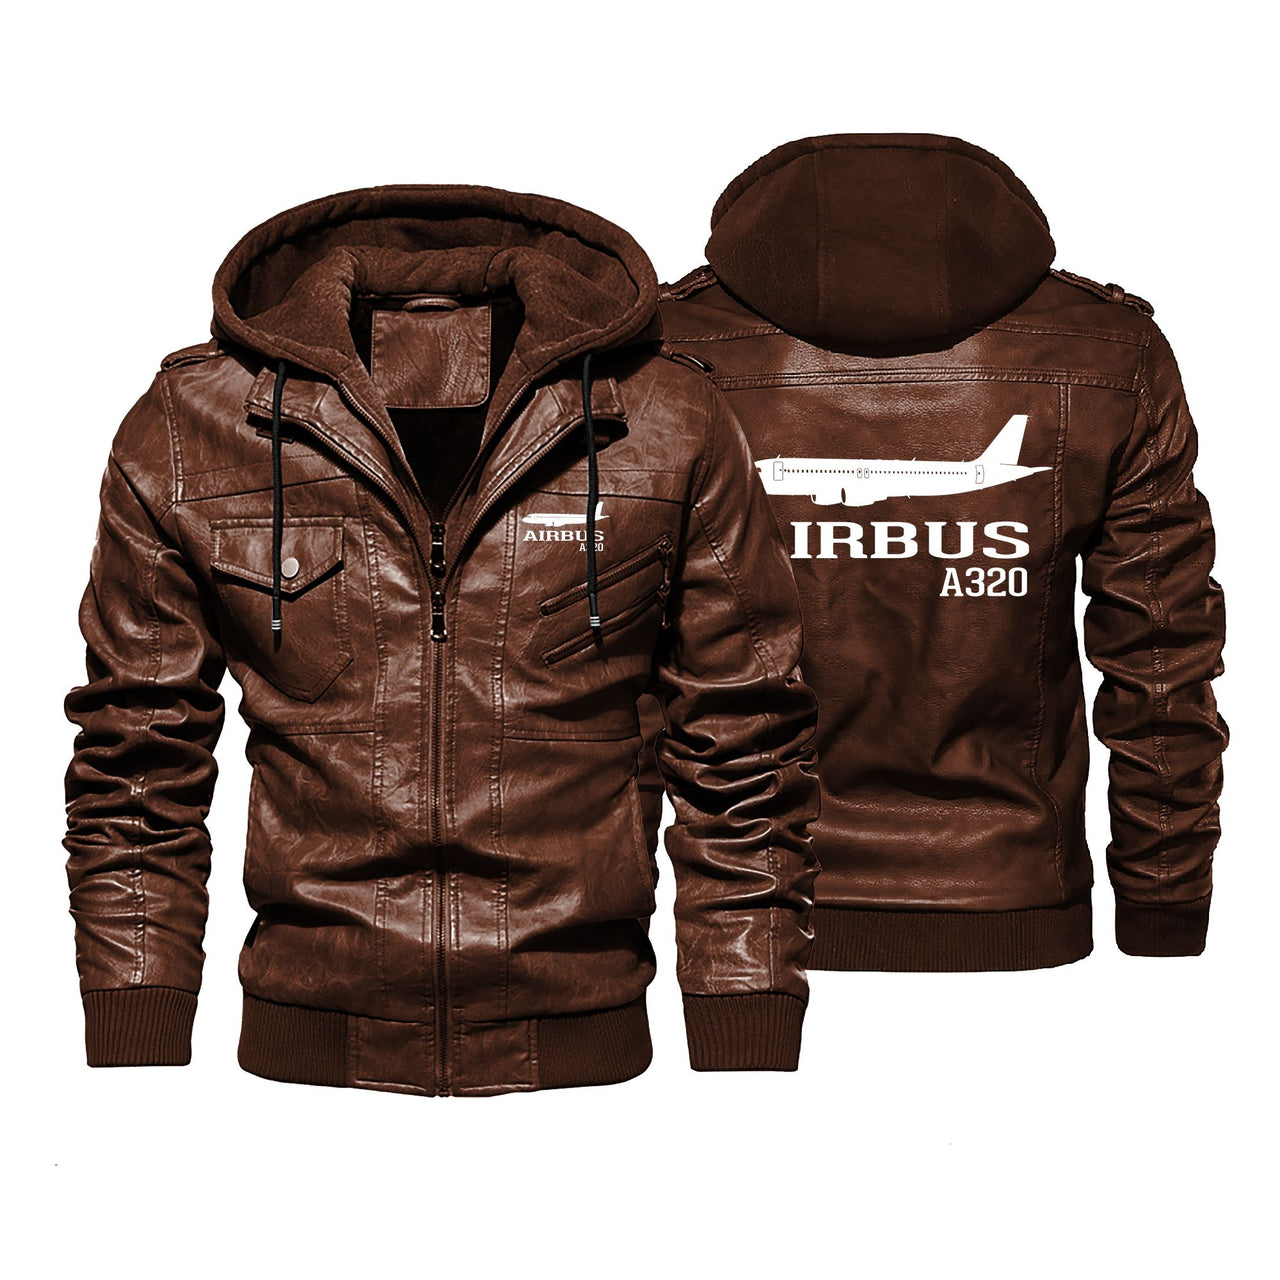 Airbus A320 Printed Designed Hooded Leather Jackets